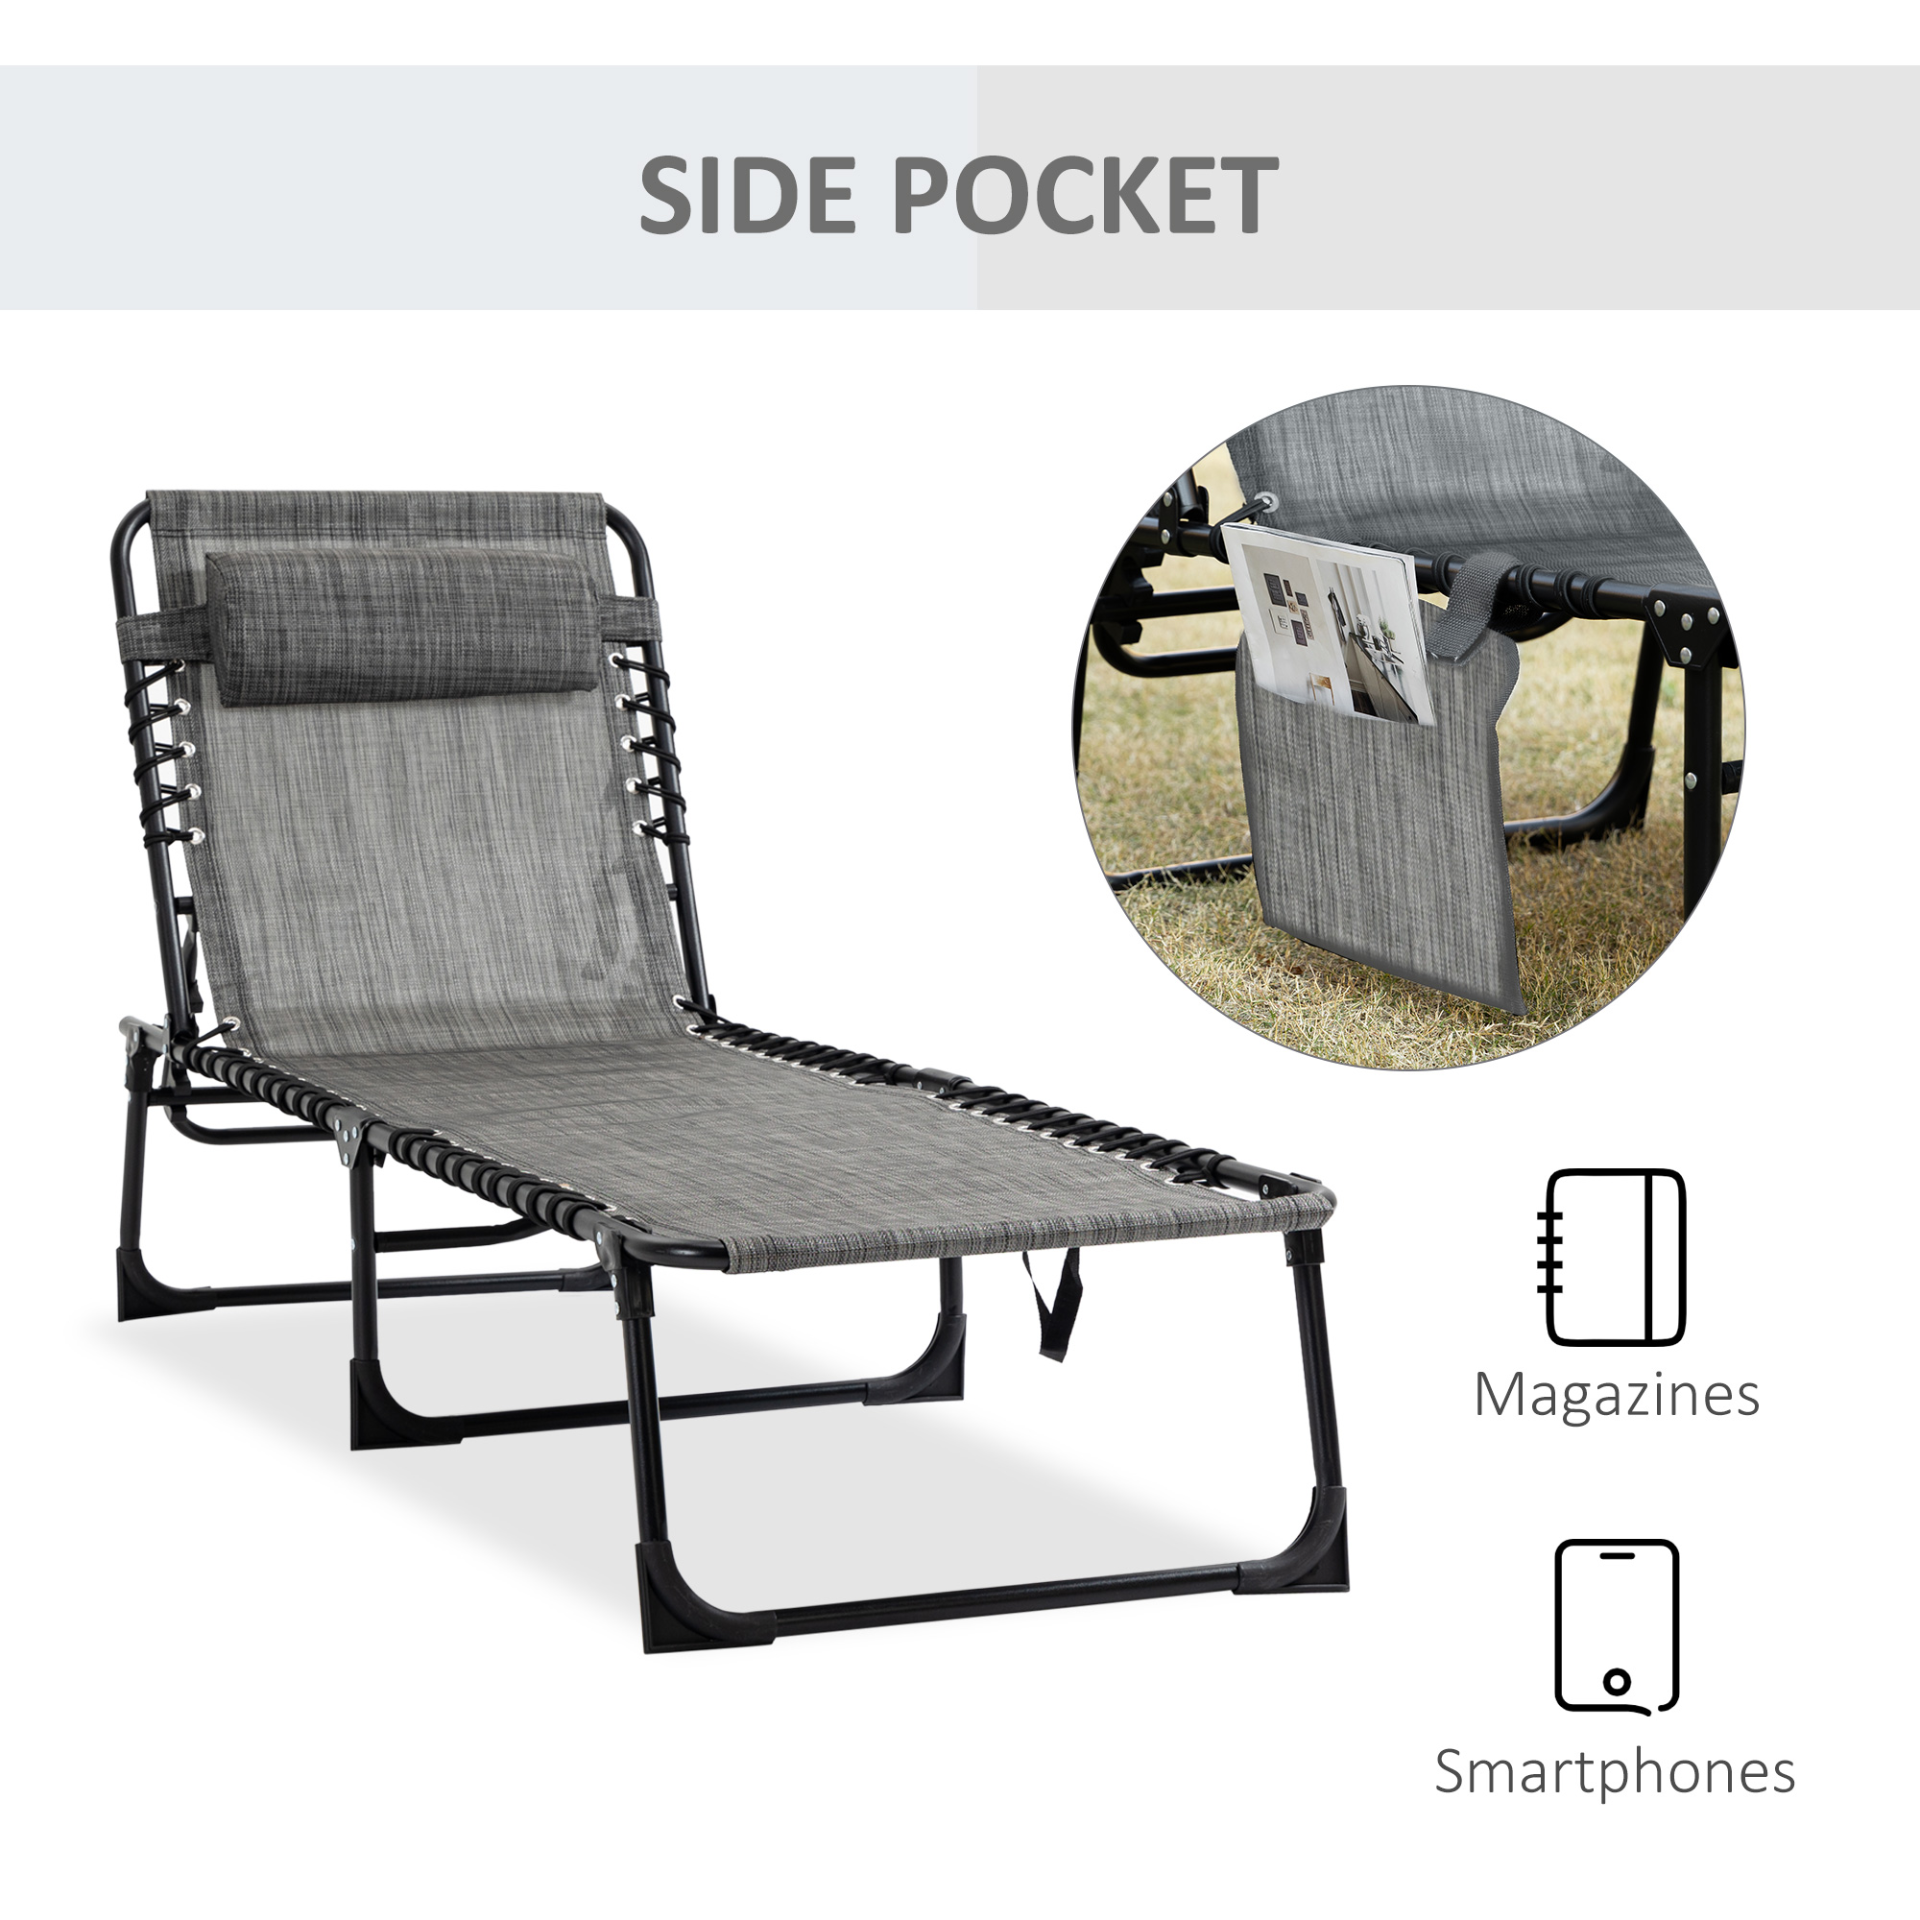 Outsunny Portable Sun Lounger, Folding Camping Bed Cot, Reclining Lounge Chair - Mixed Grey Camping Chair Cosy Camping Co.   